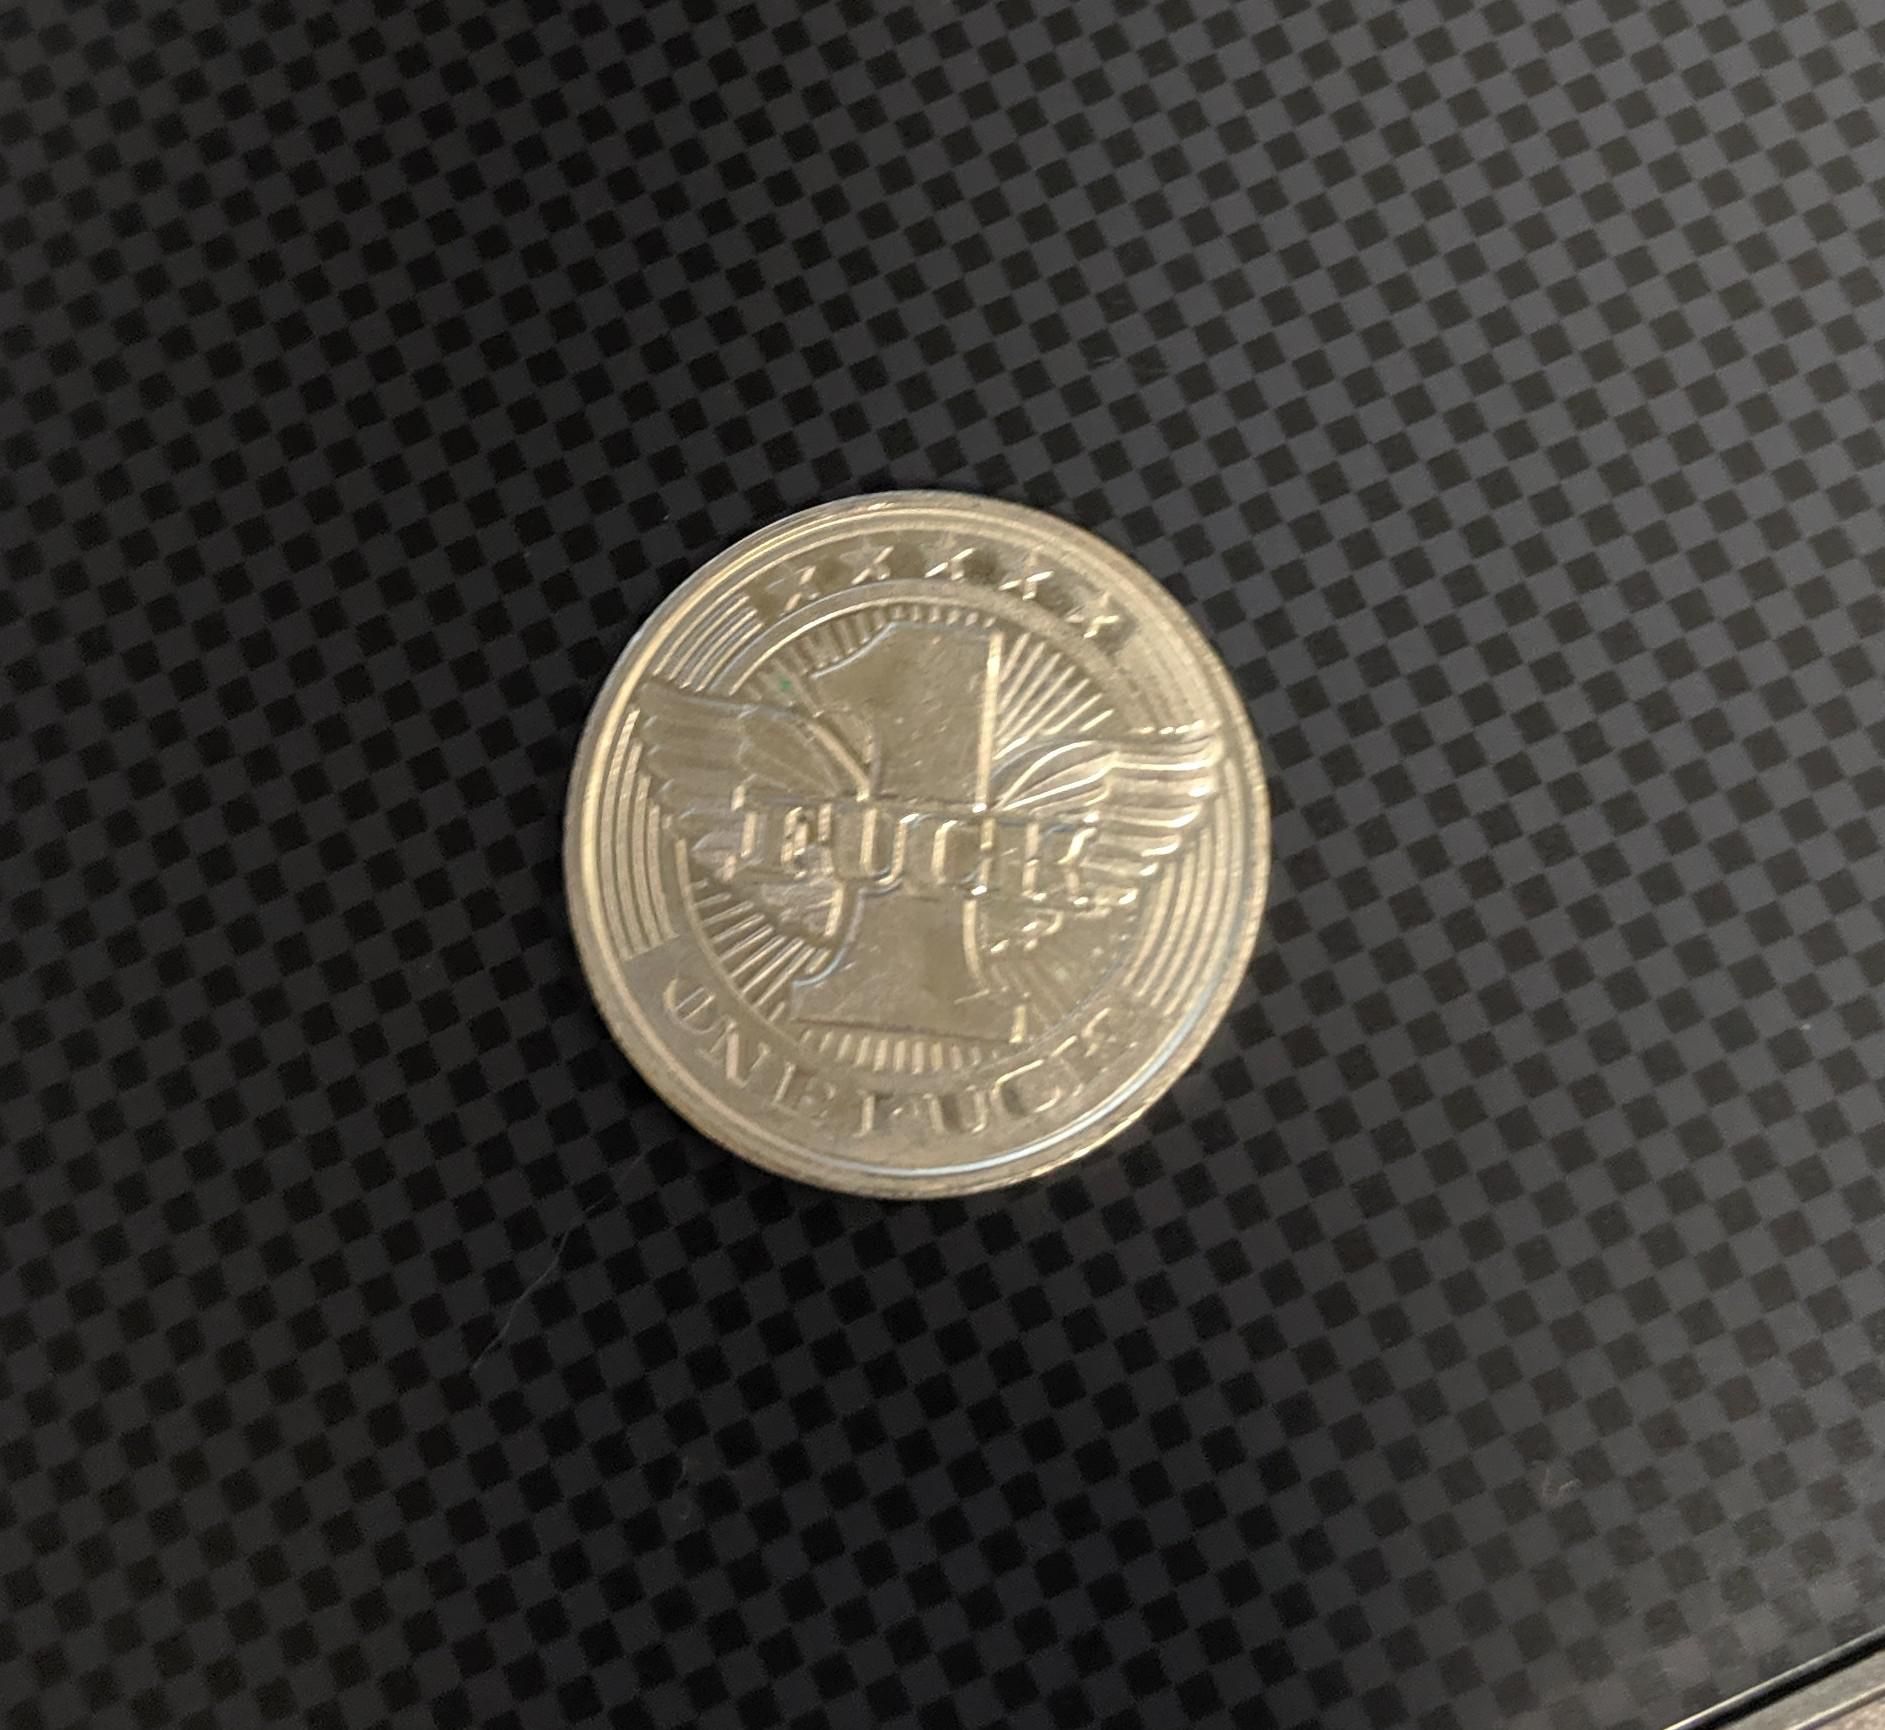 I accidentally gave this to a cashier and couldn't figure out why she was staring at my "quarter" for so long.